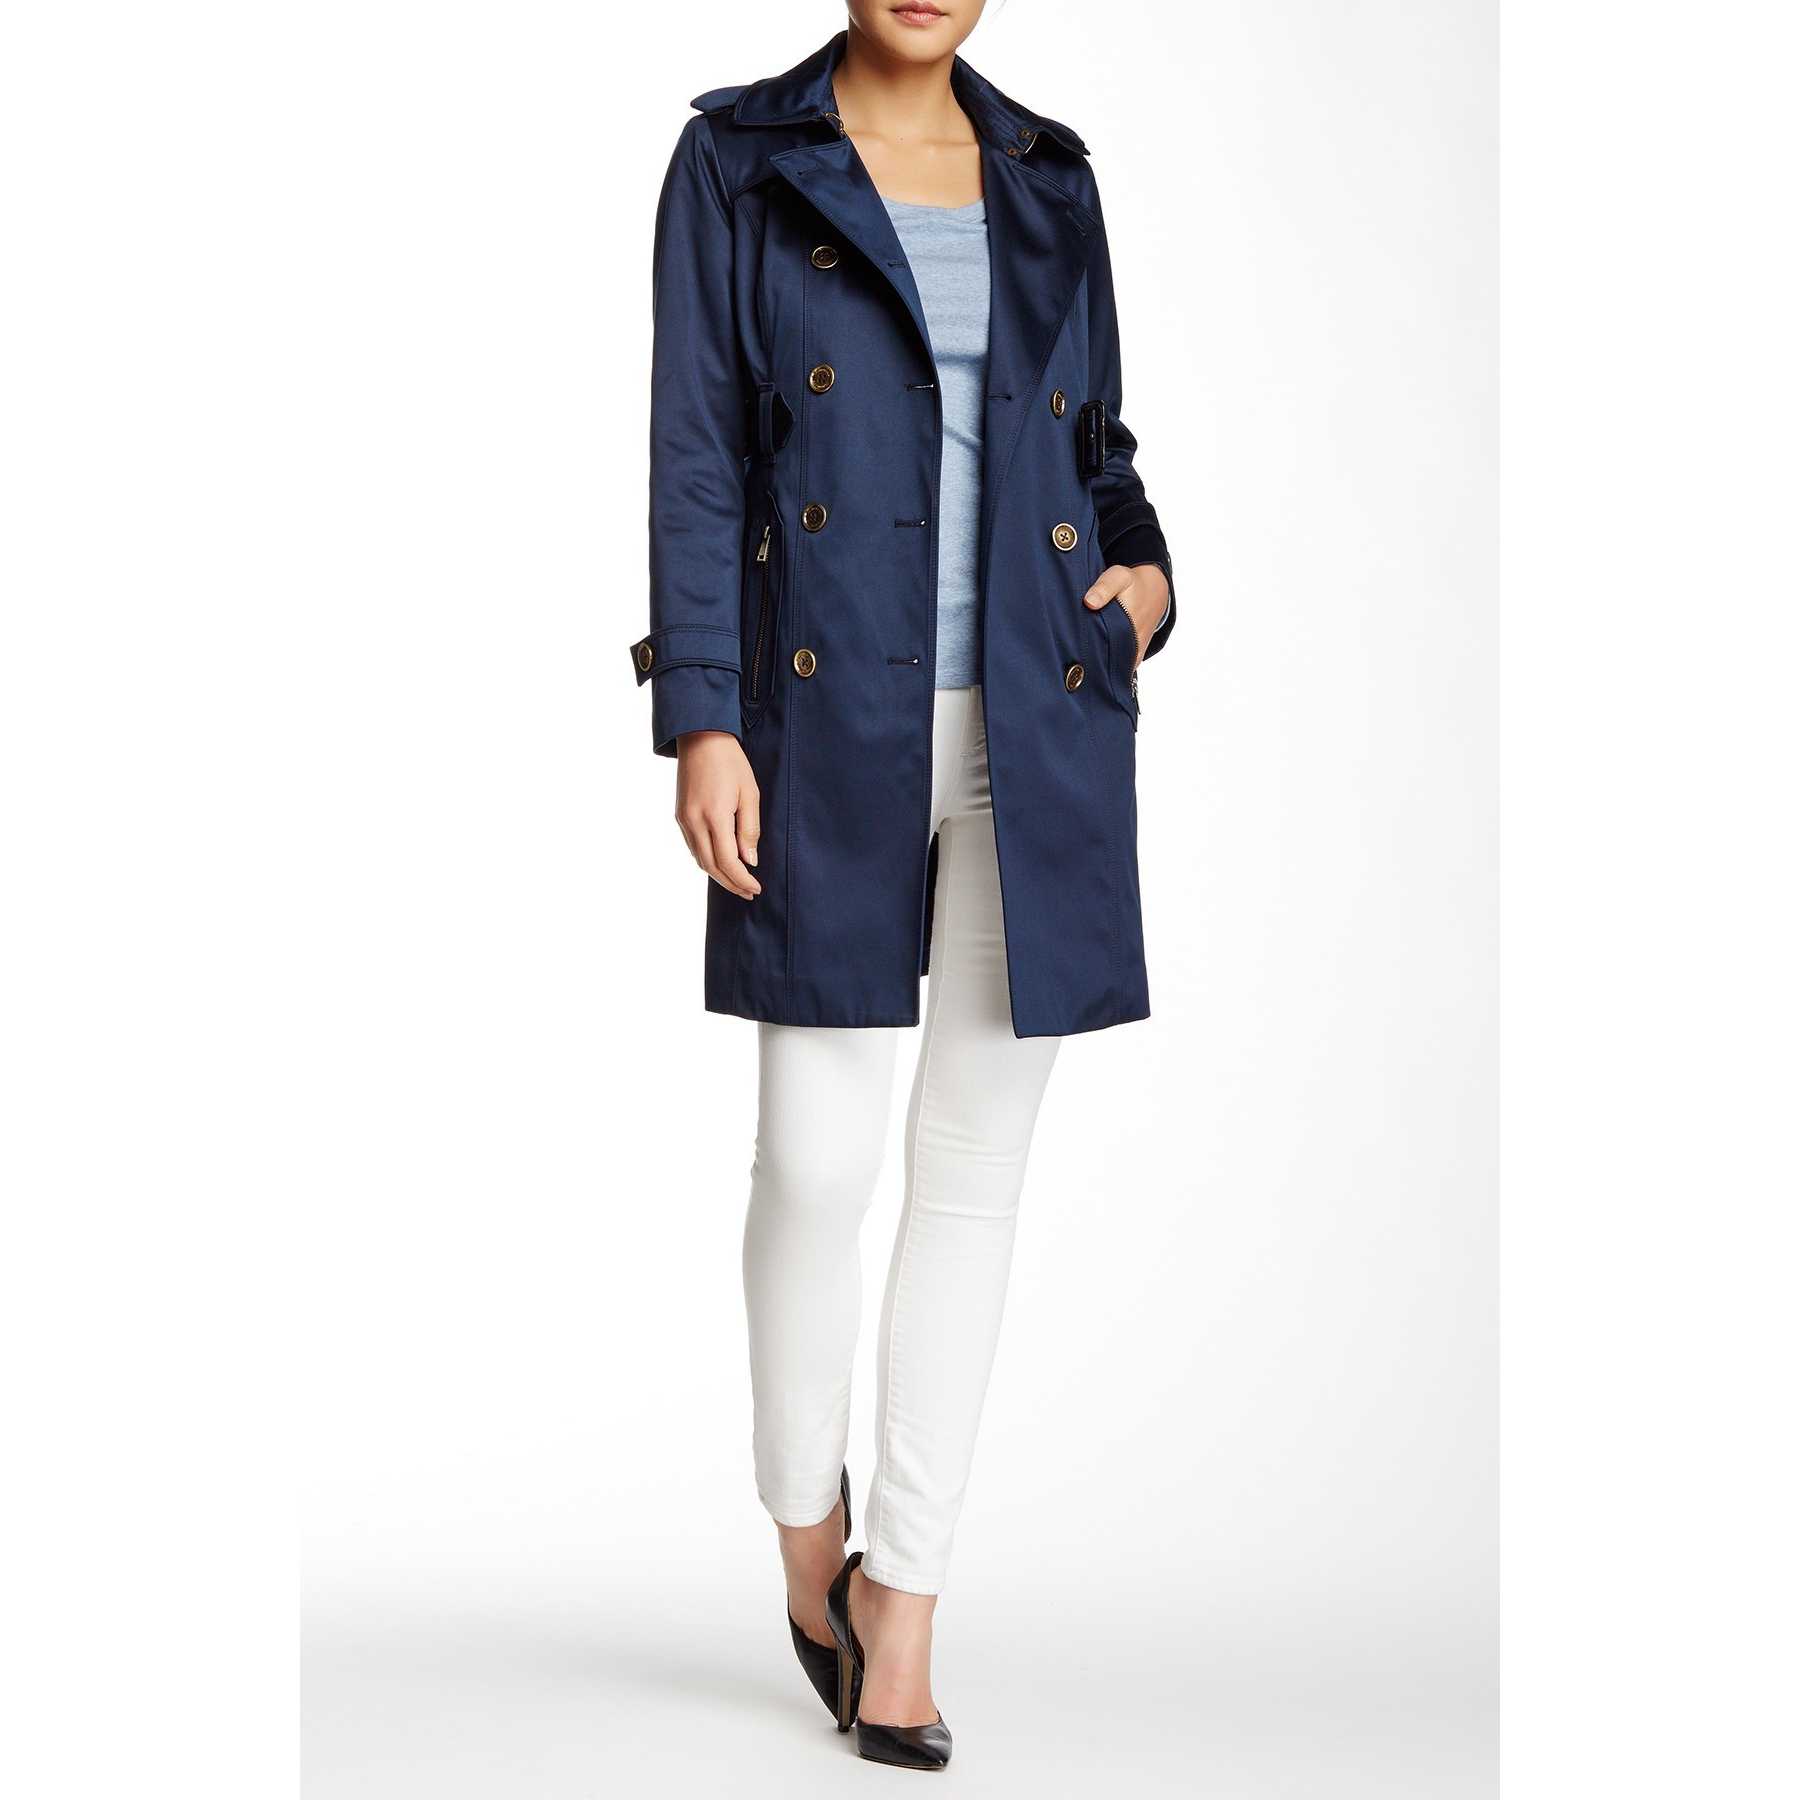 London Fog Water Repellent Double Breasted Trench Coat (Petite) NAVY trench dama